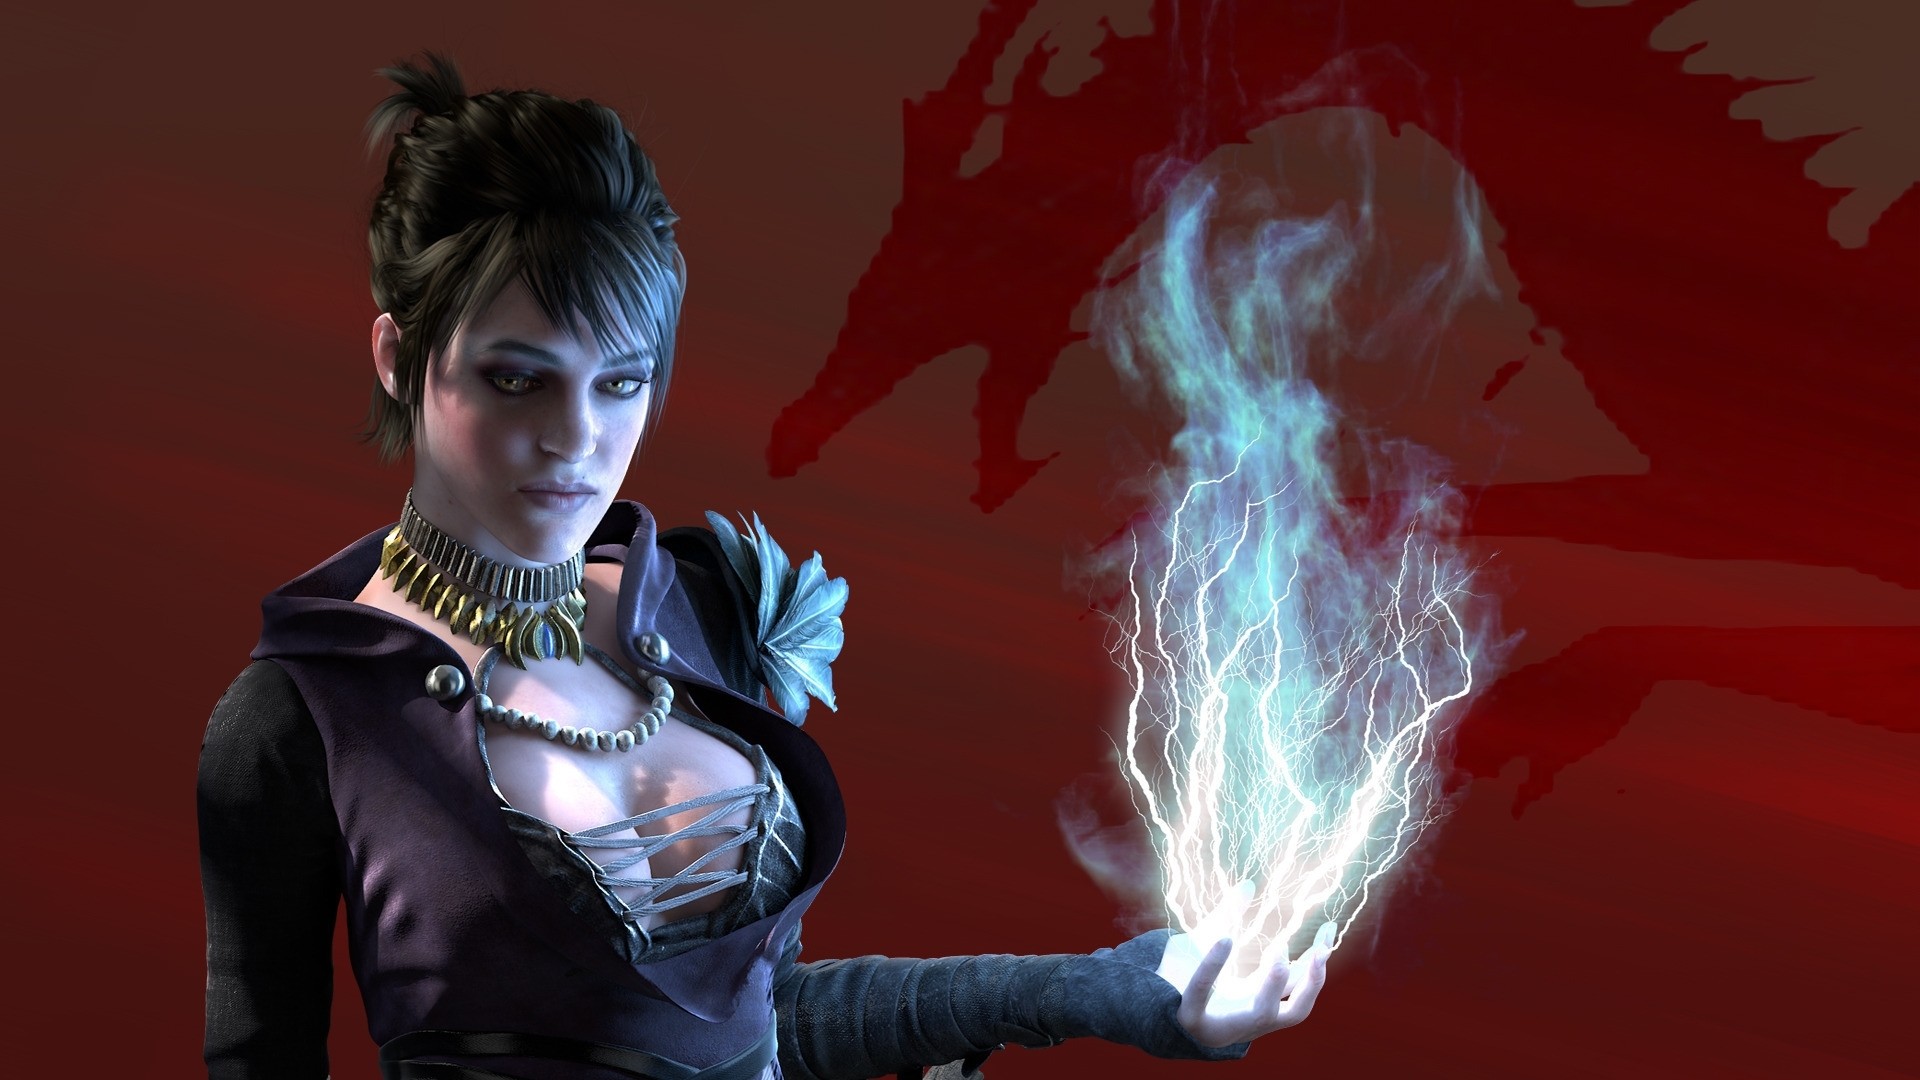 1920x1080 Title : dragon age: origins full hd wallpaper and background image.  Dimension : 1920 x 1080. File Type : JPG/JPEG